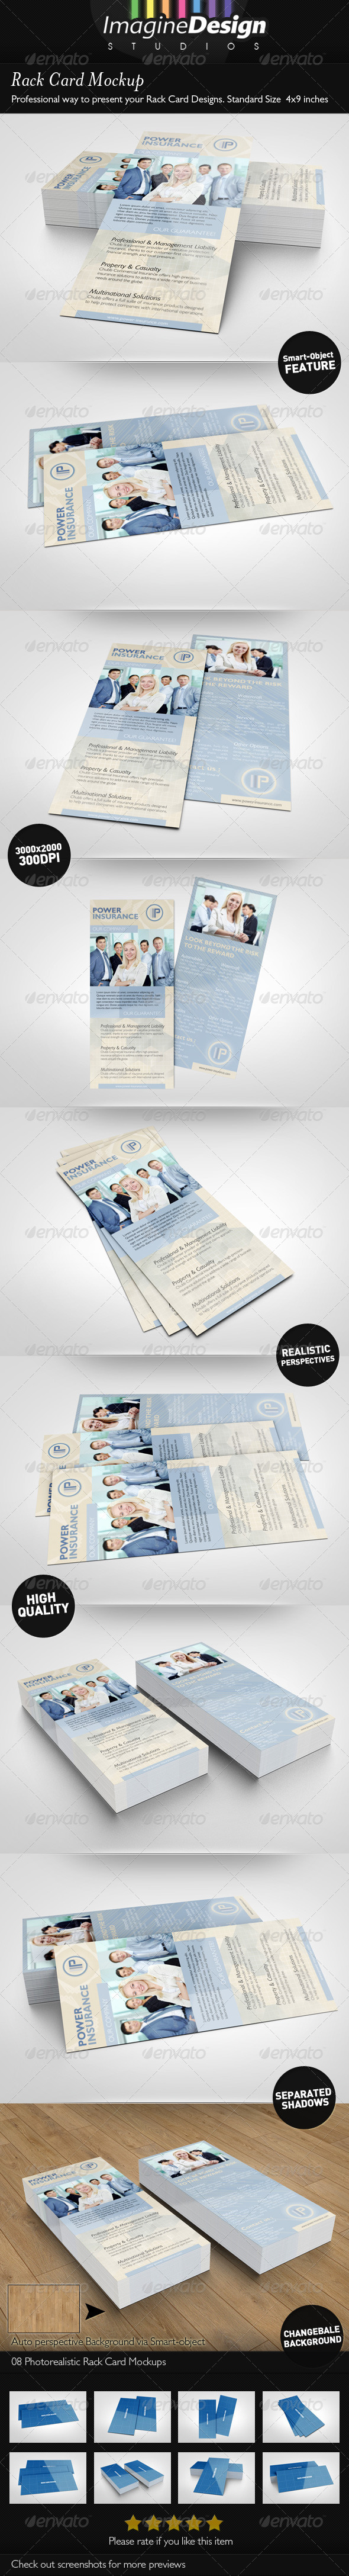 Download Rack Card Mockup Graphics Designs Templates From Graphicriver